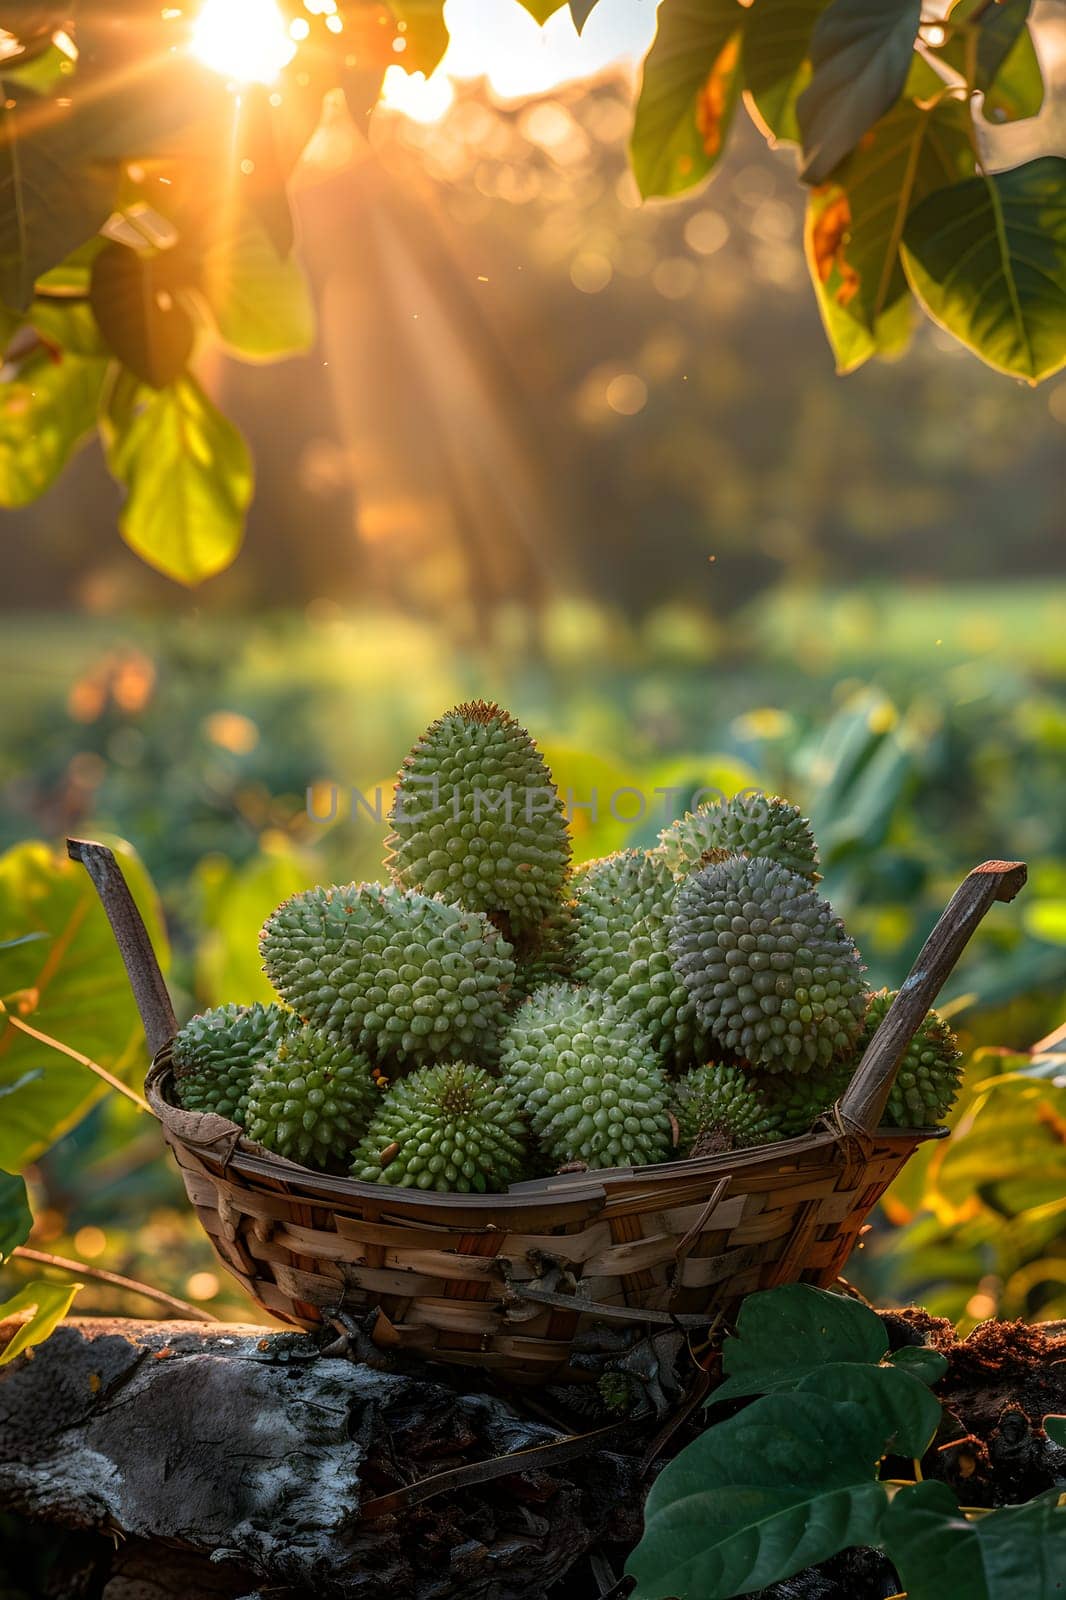 A basket of green fruit sits on a rock, showcasing terrestrial plant life by Nadtochiy